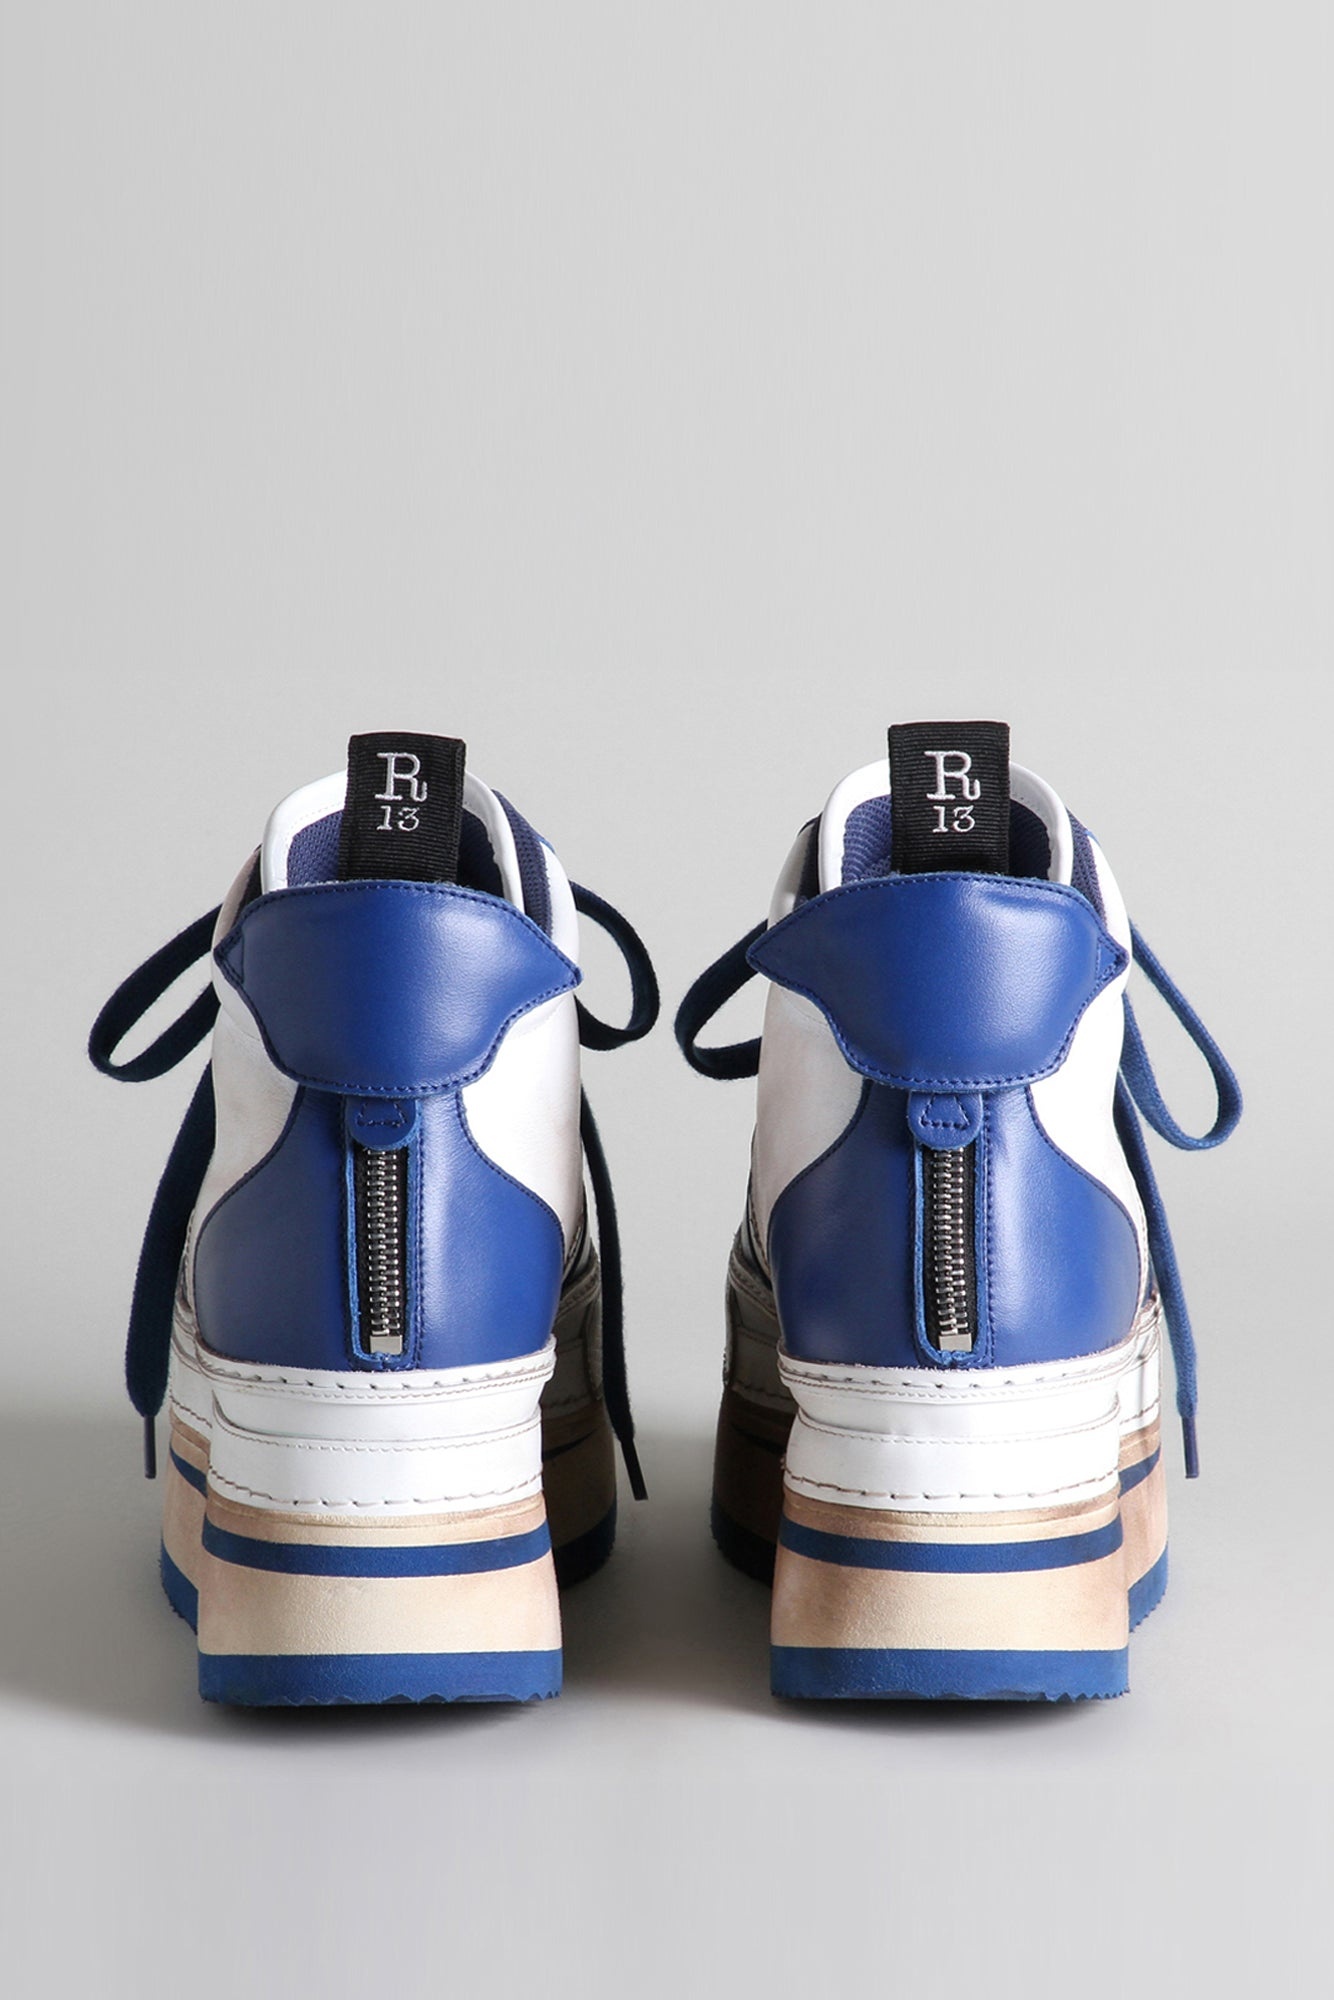 The Riot Leather High Top - Blue and White | R13 Denim Official Site - 3